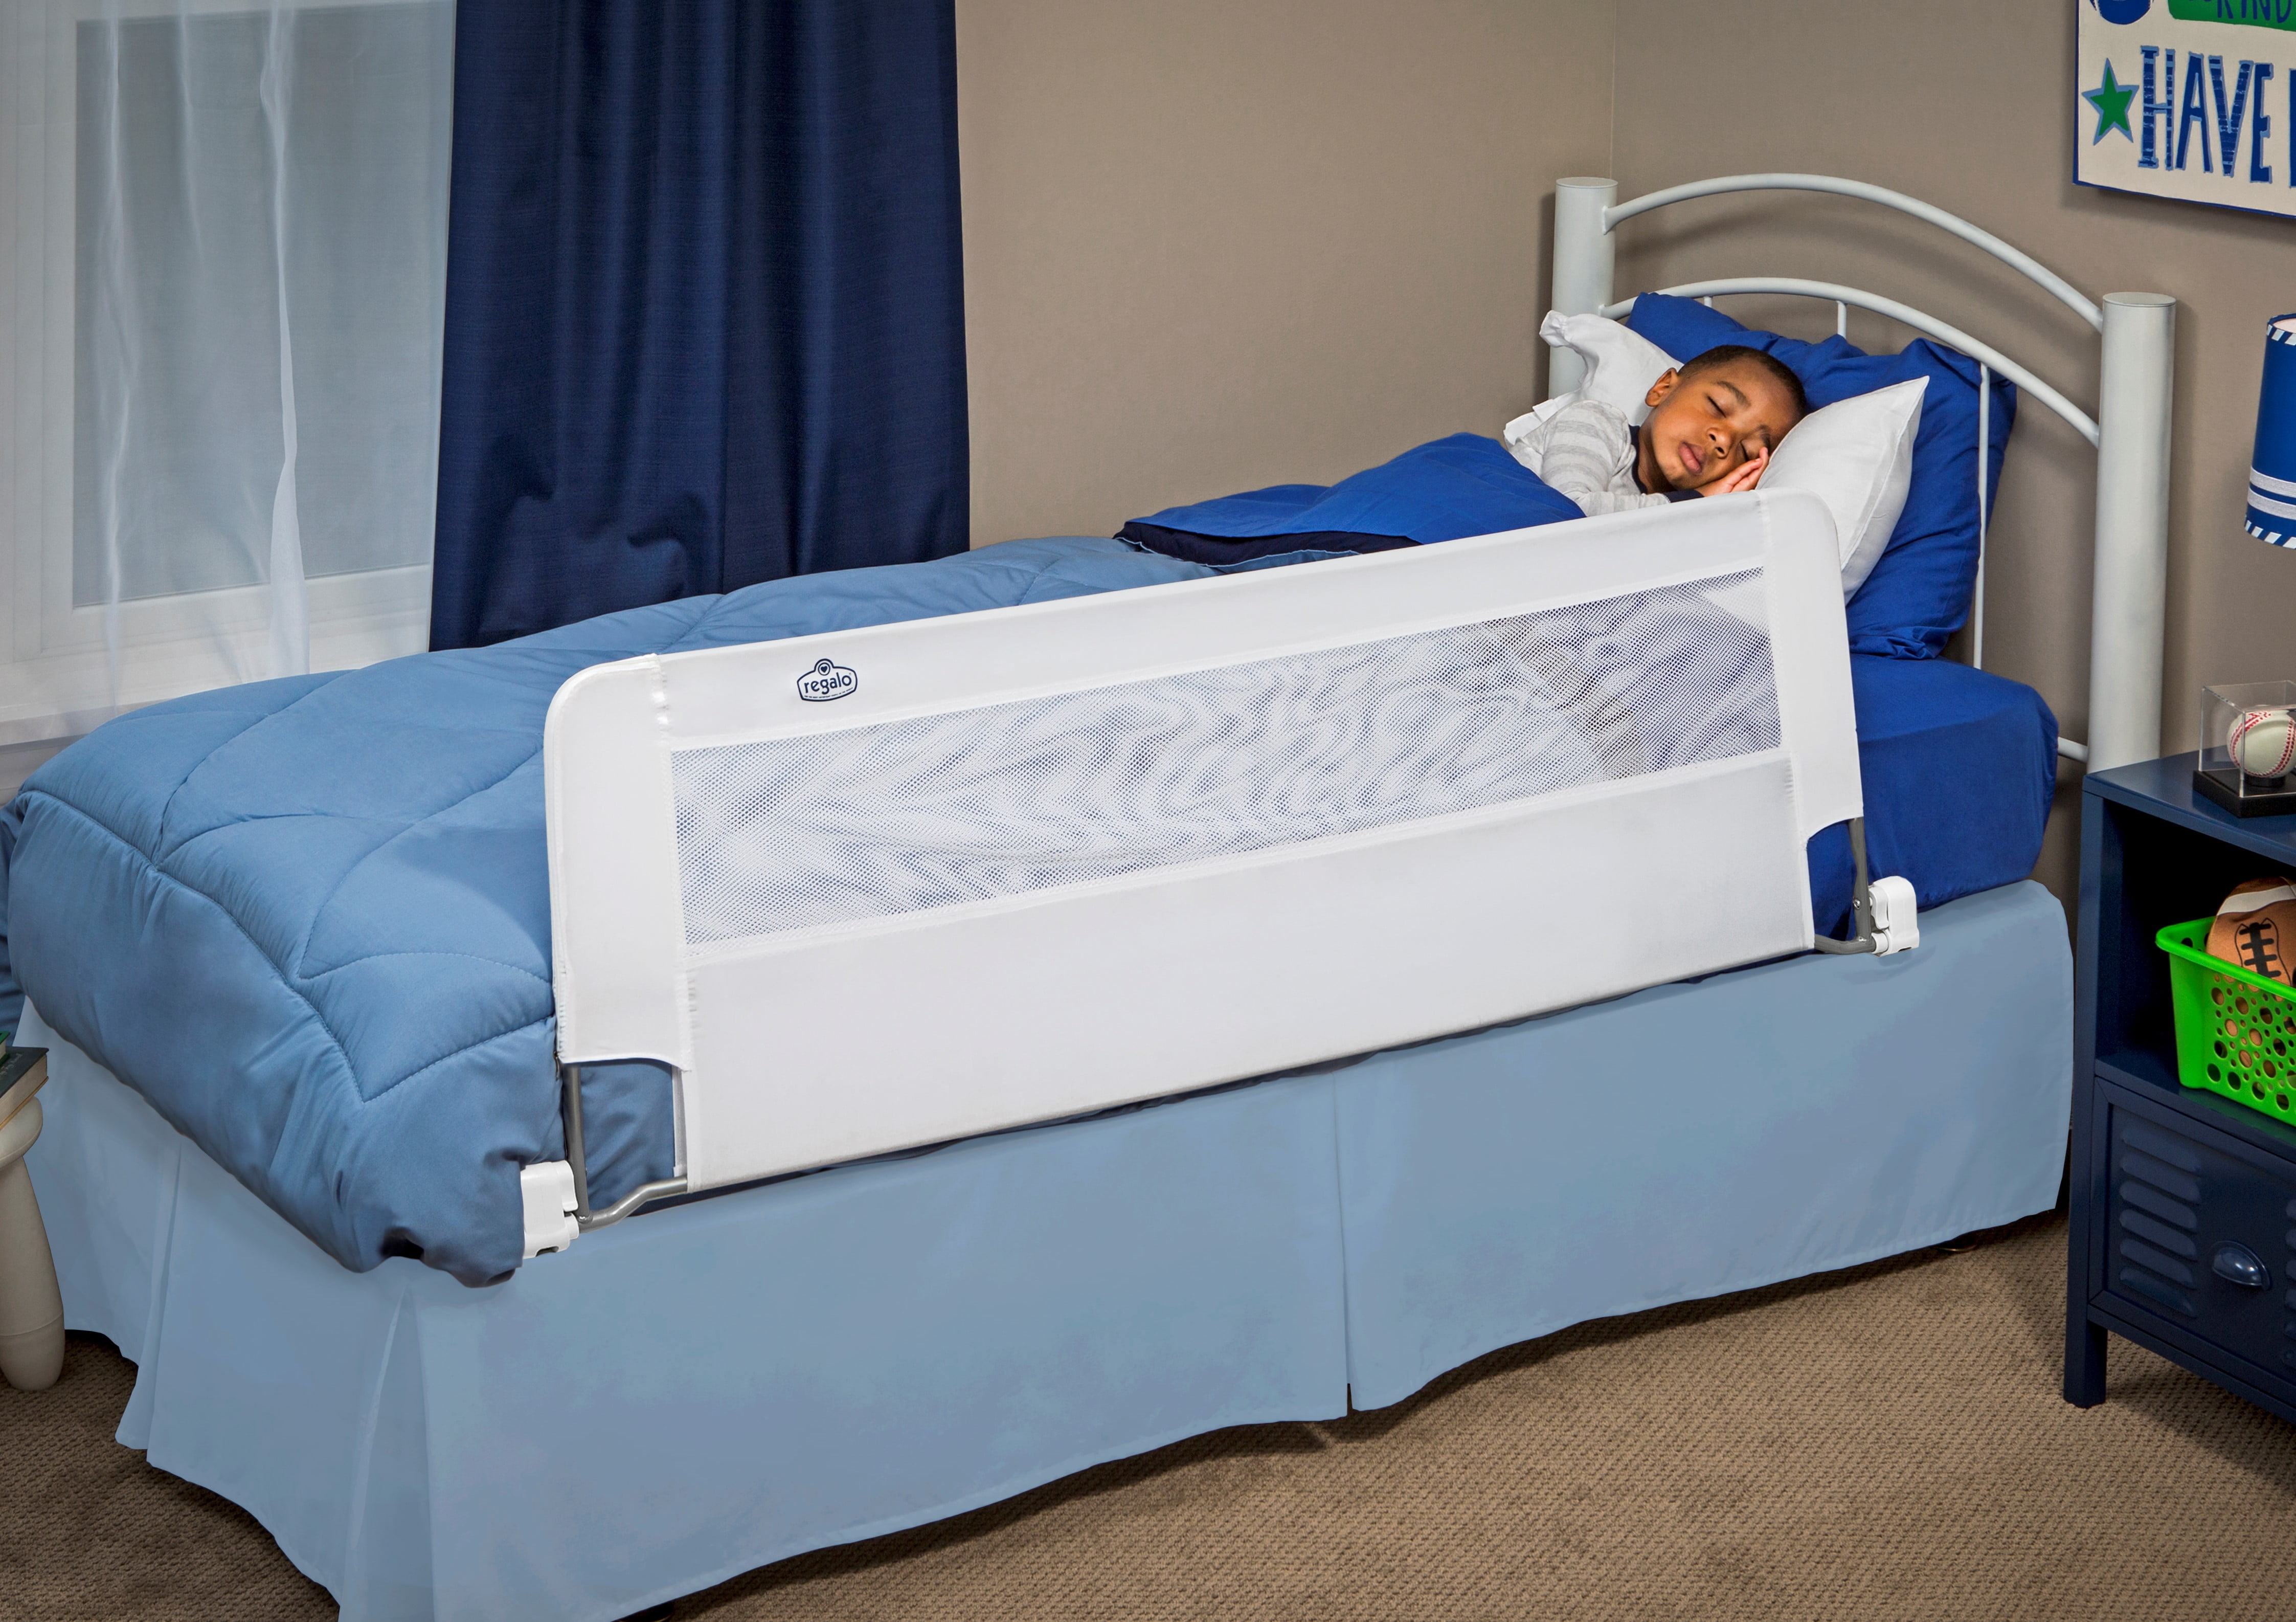 purchase full size mattress bed rails in store